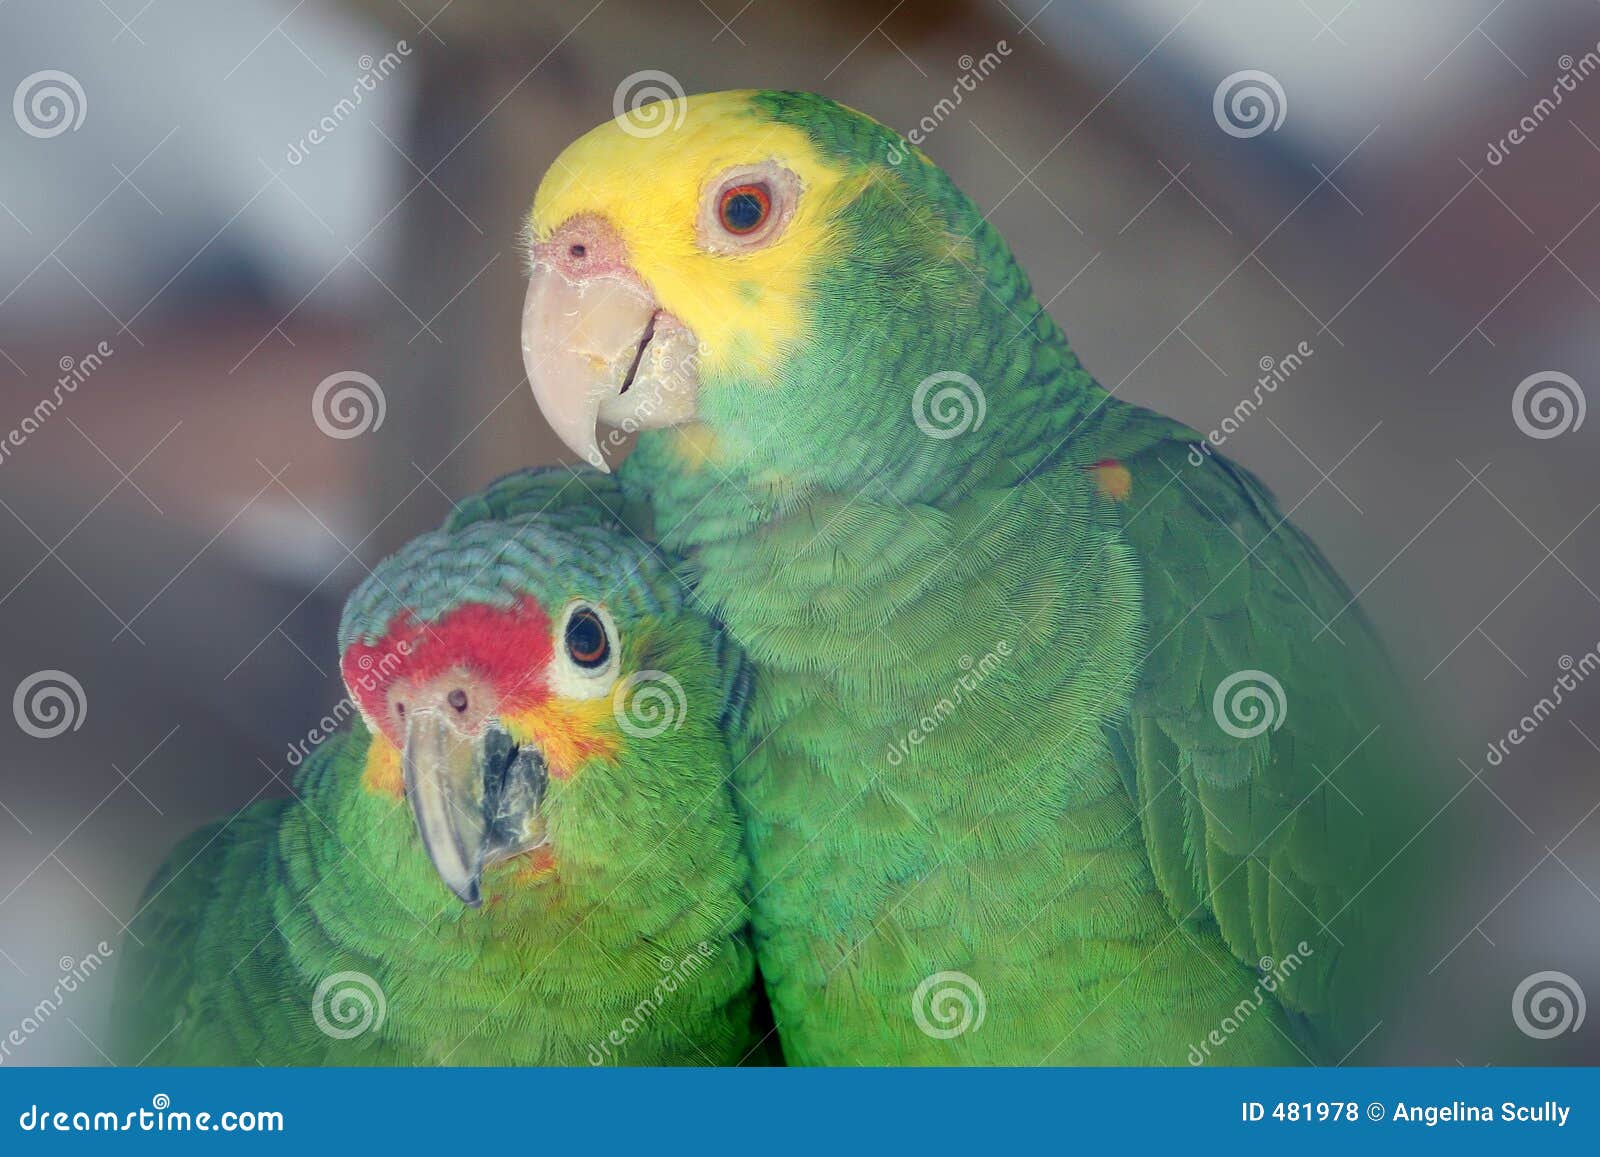 Parrot Love Birds Stock Photo Image Of Exotic Feathers